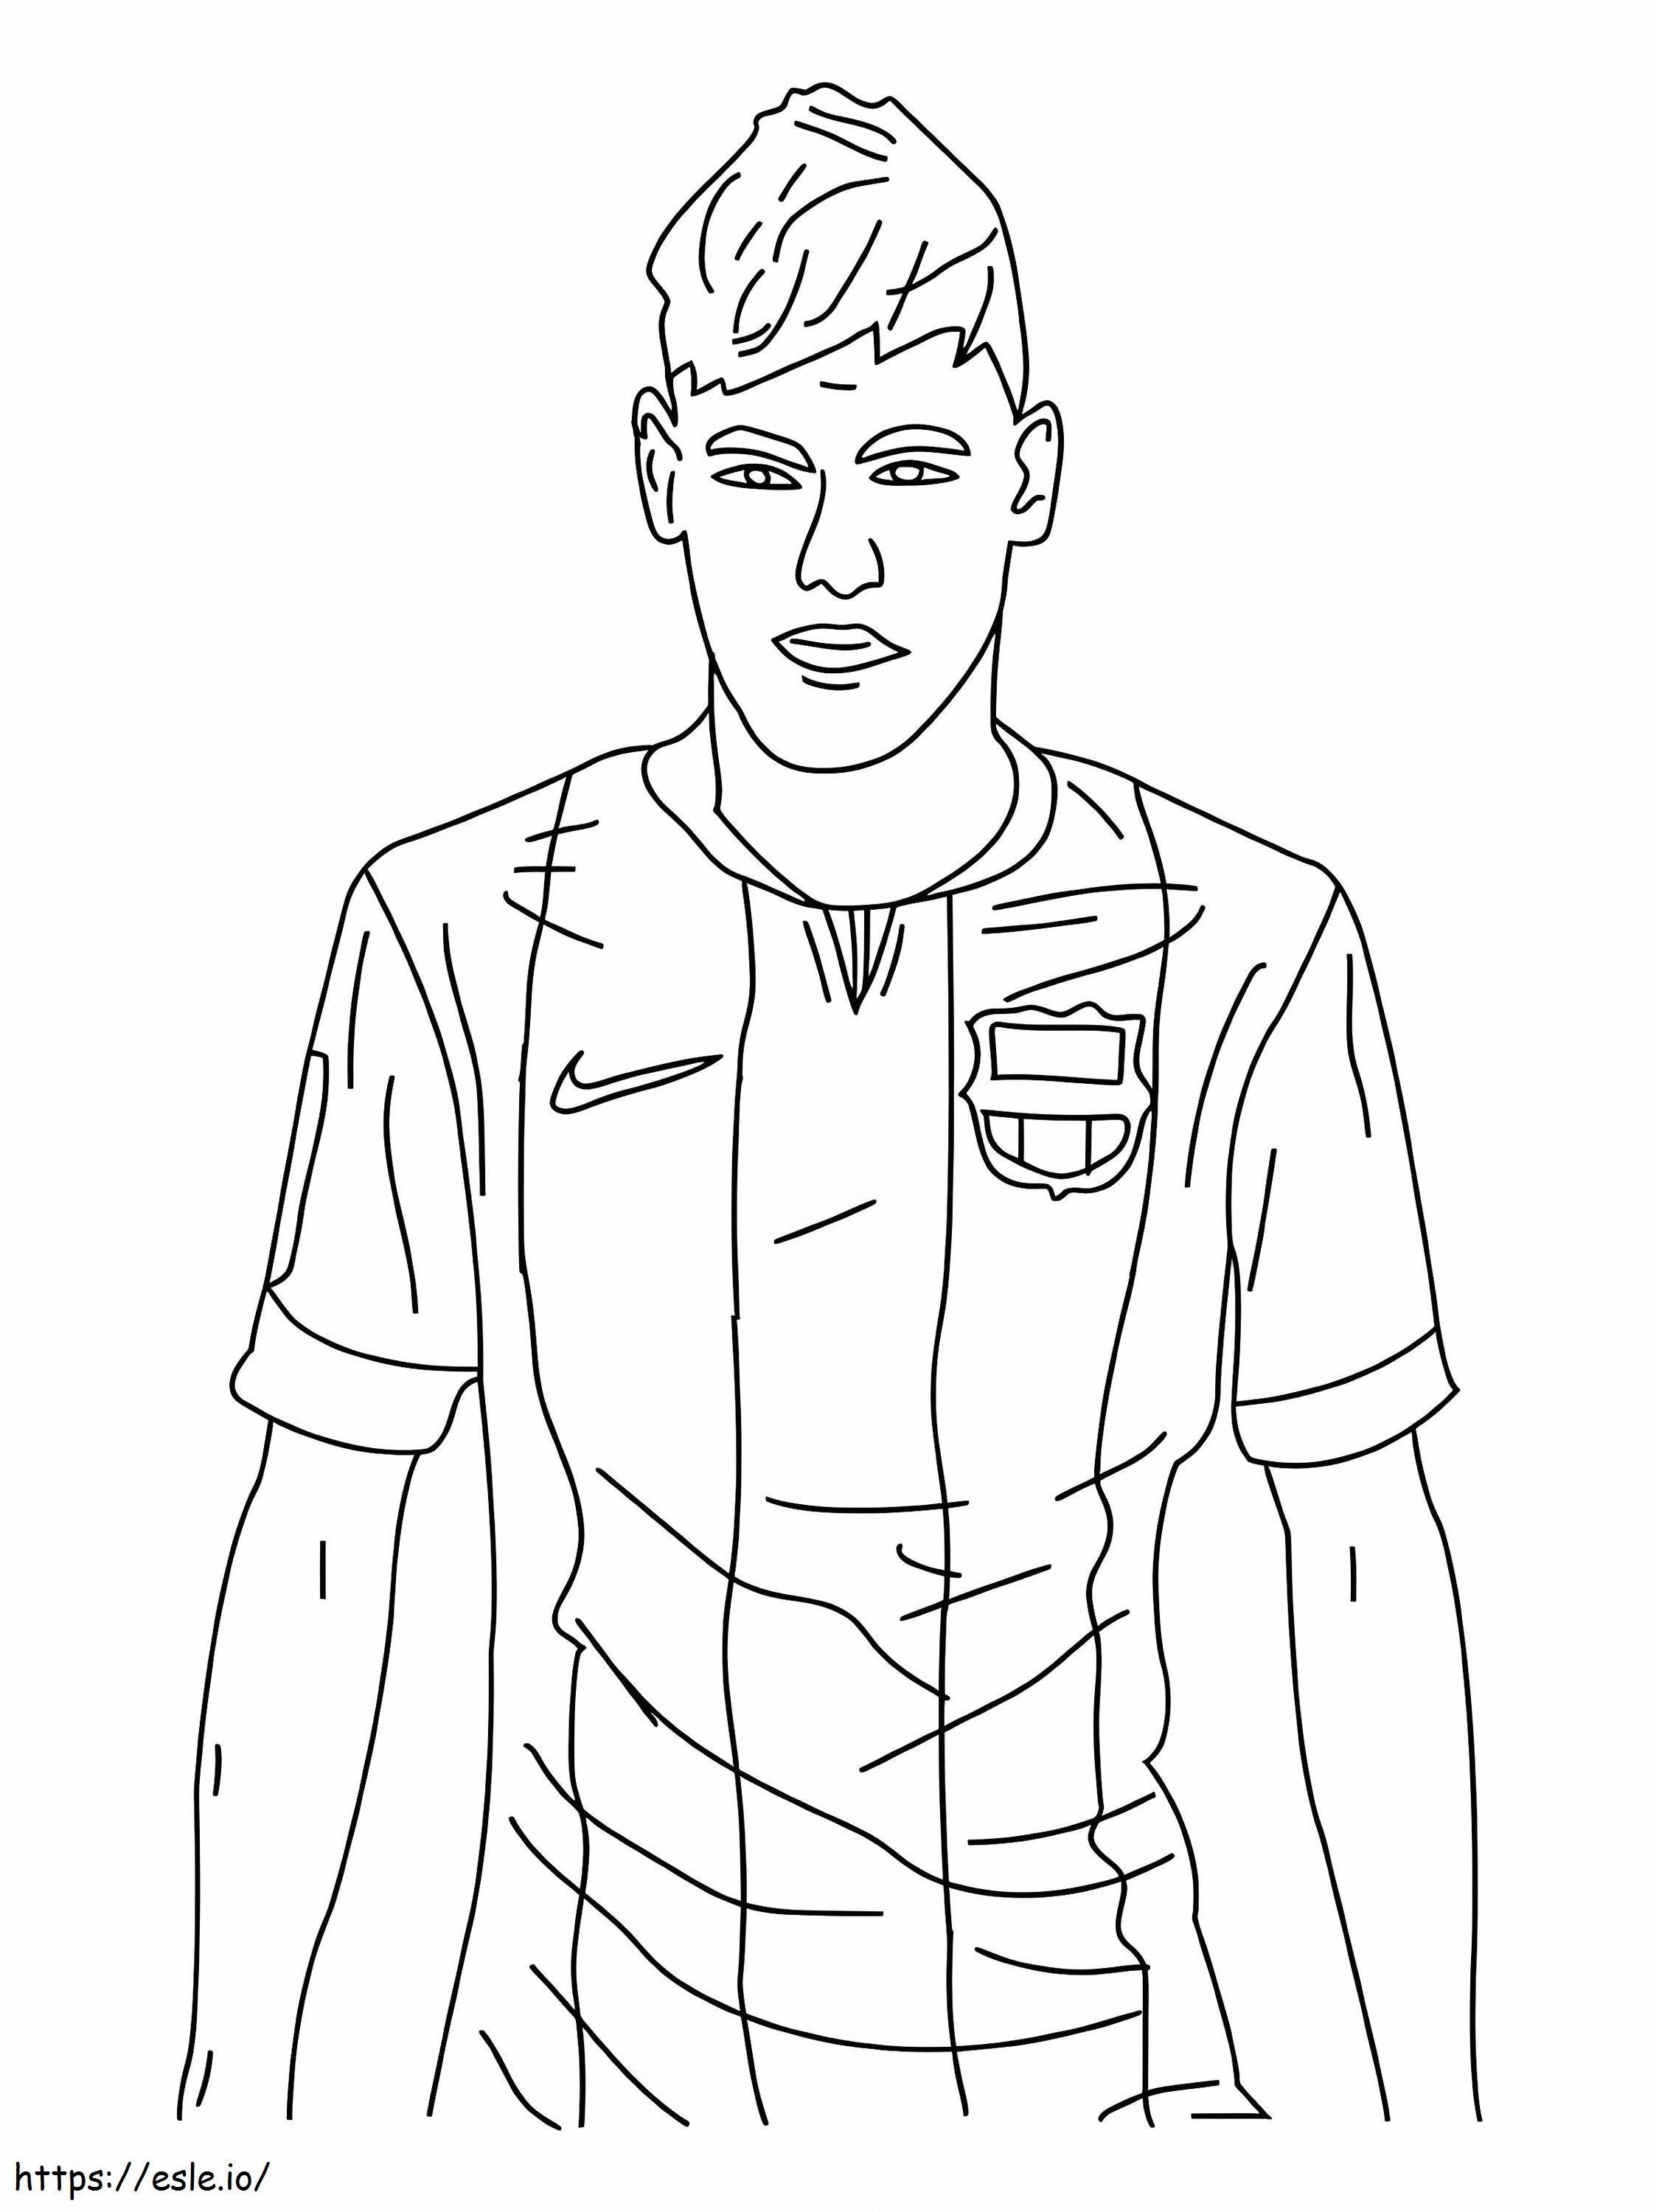 Neymar coloring page